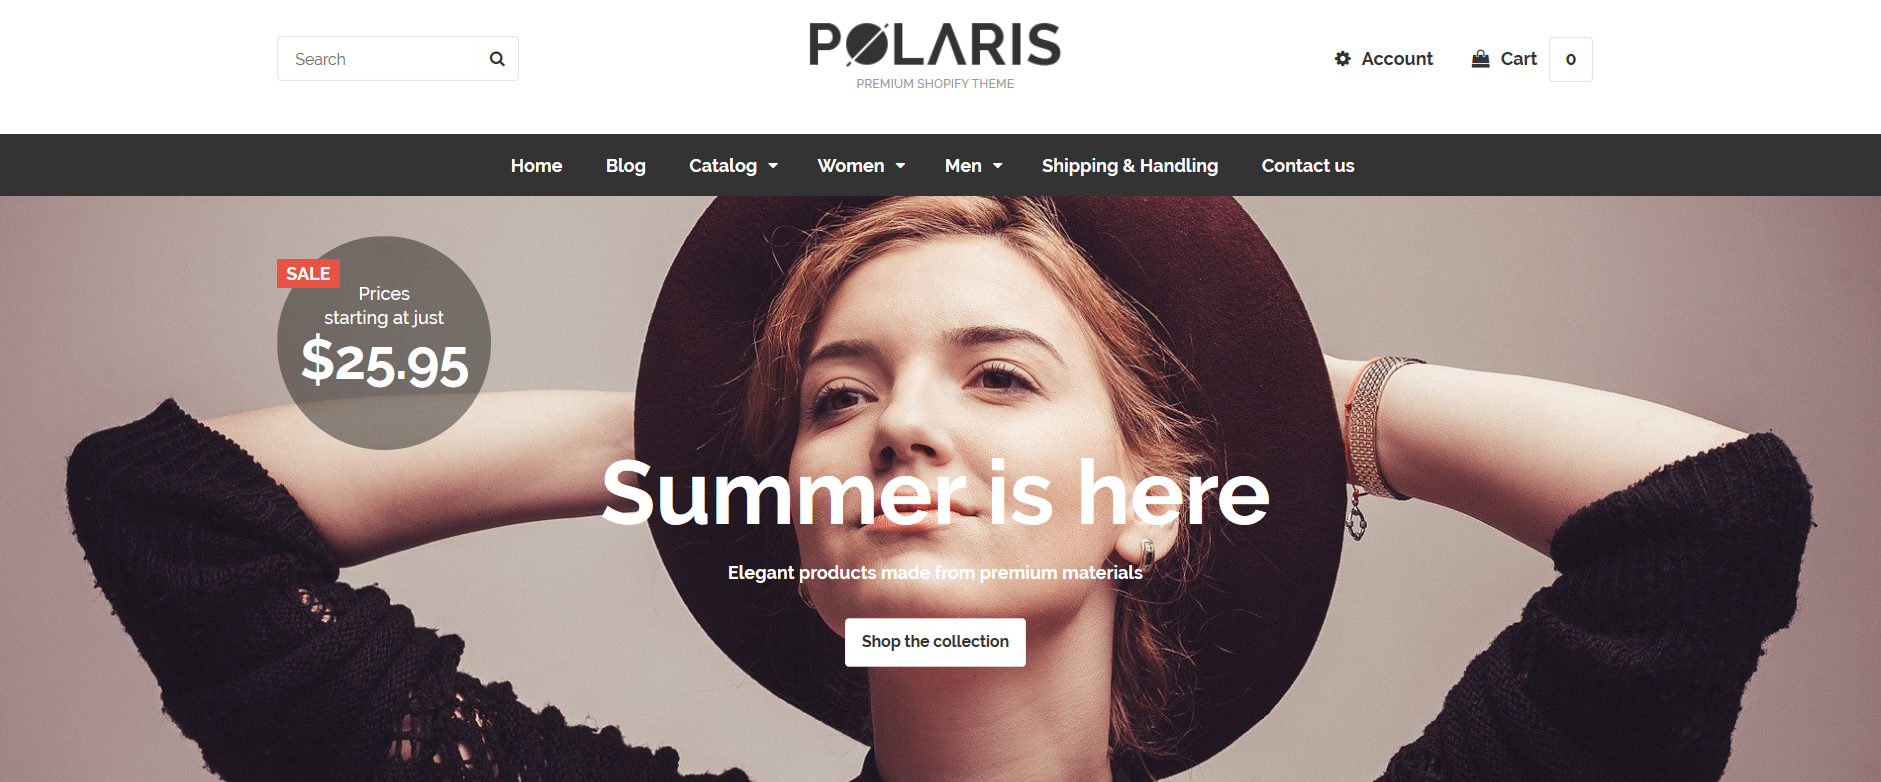 Polaris theme is highest converting themes on shopify